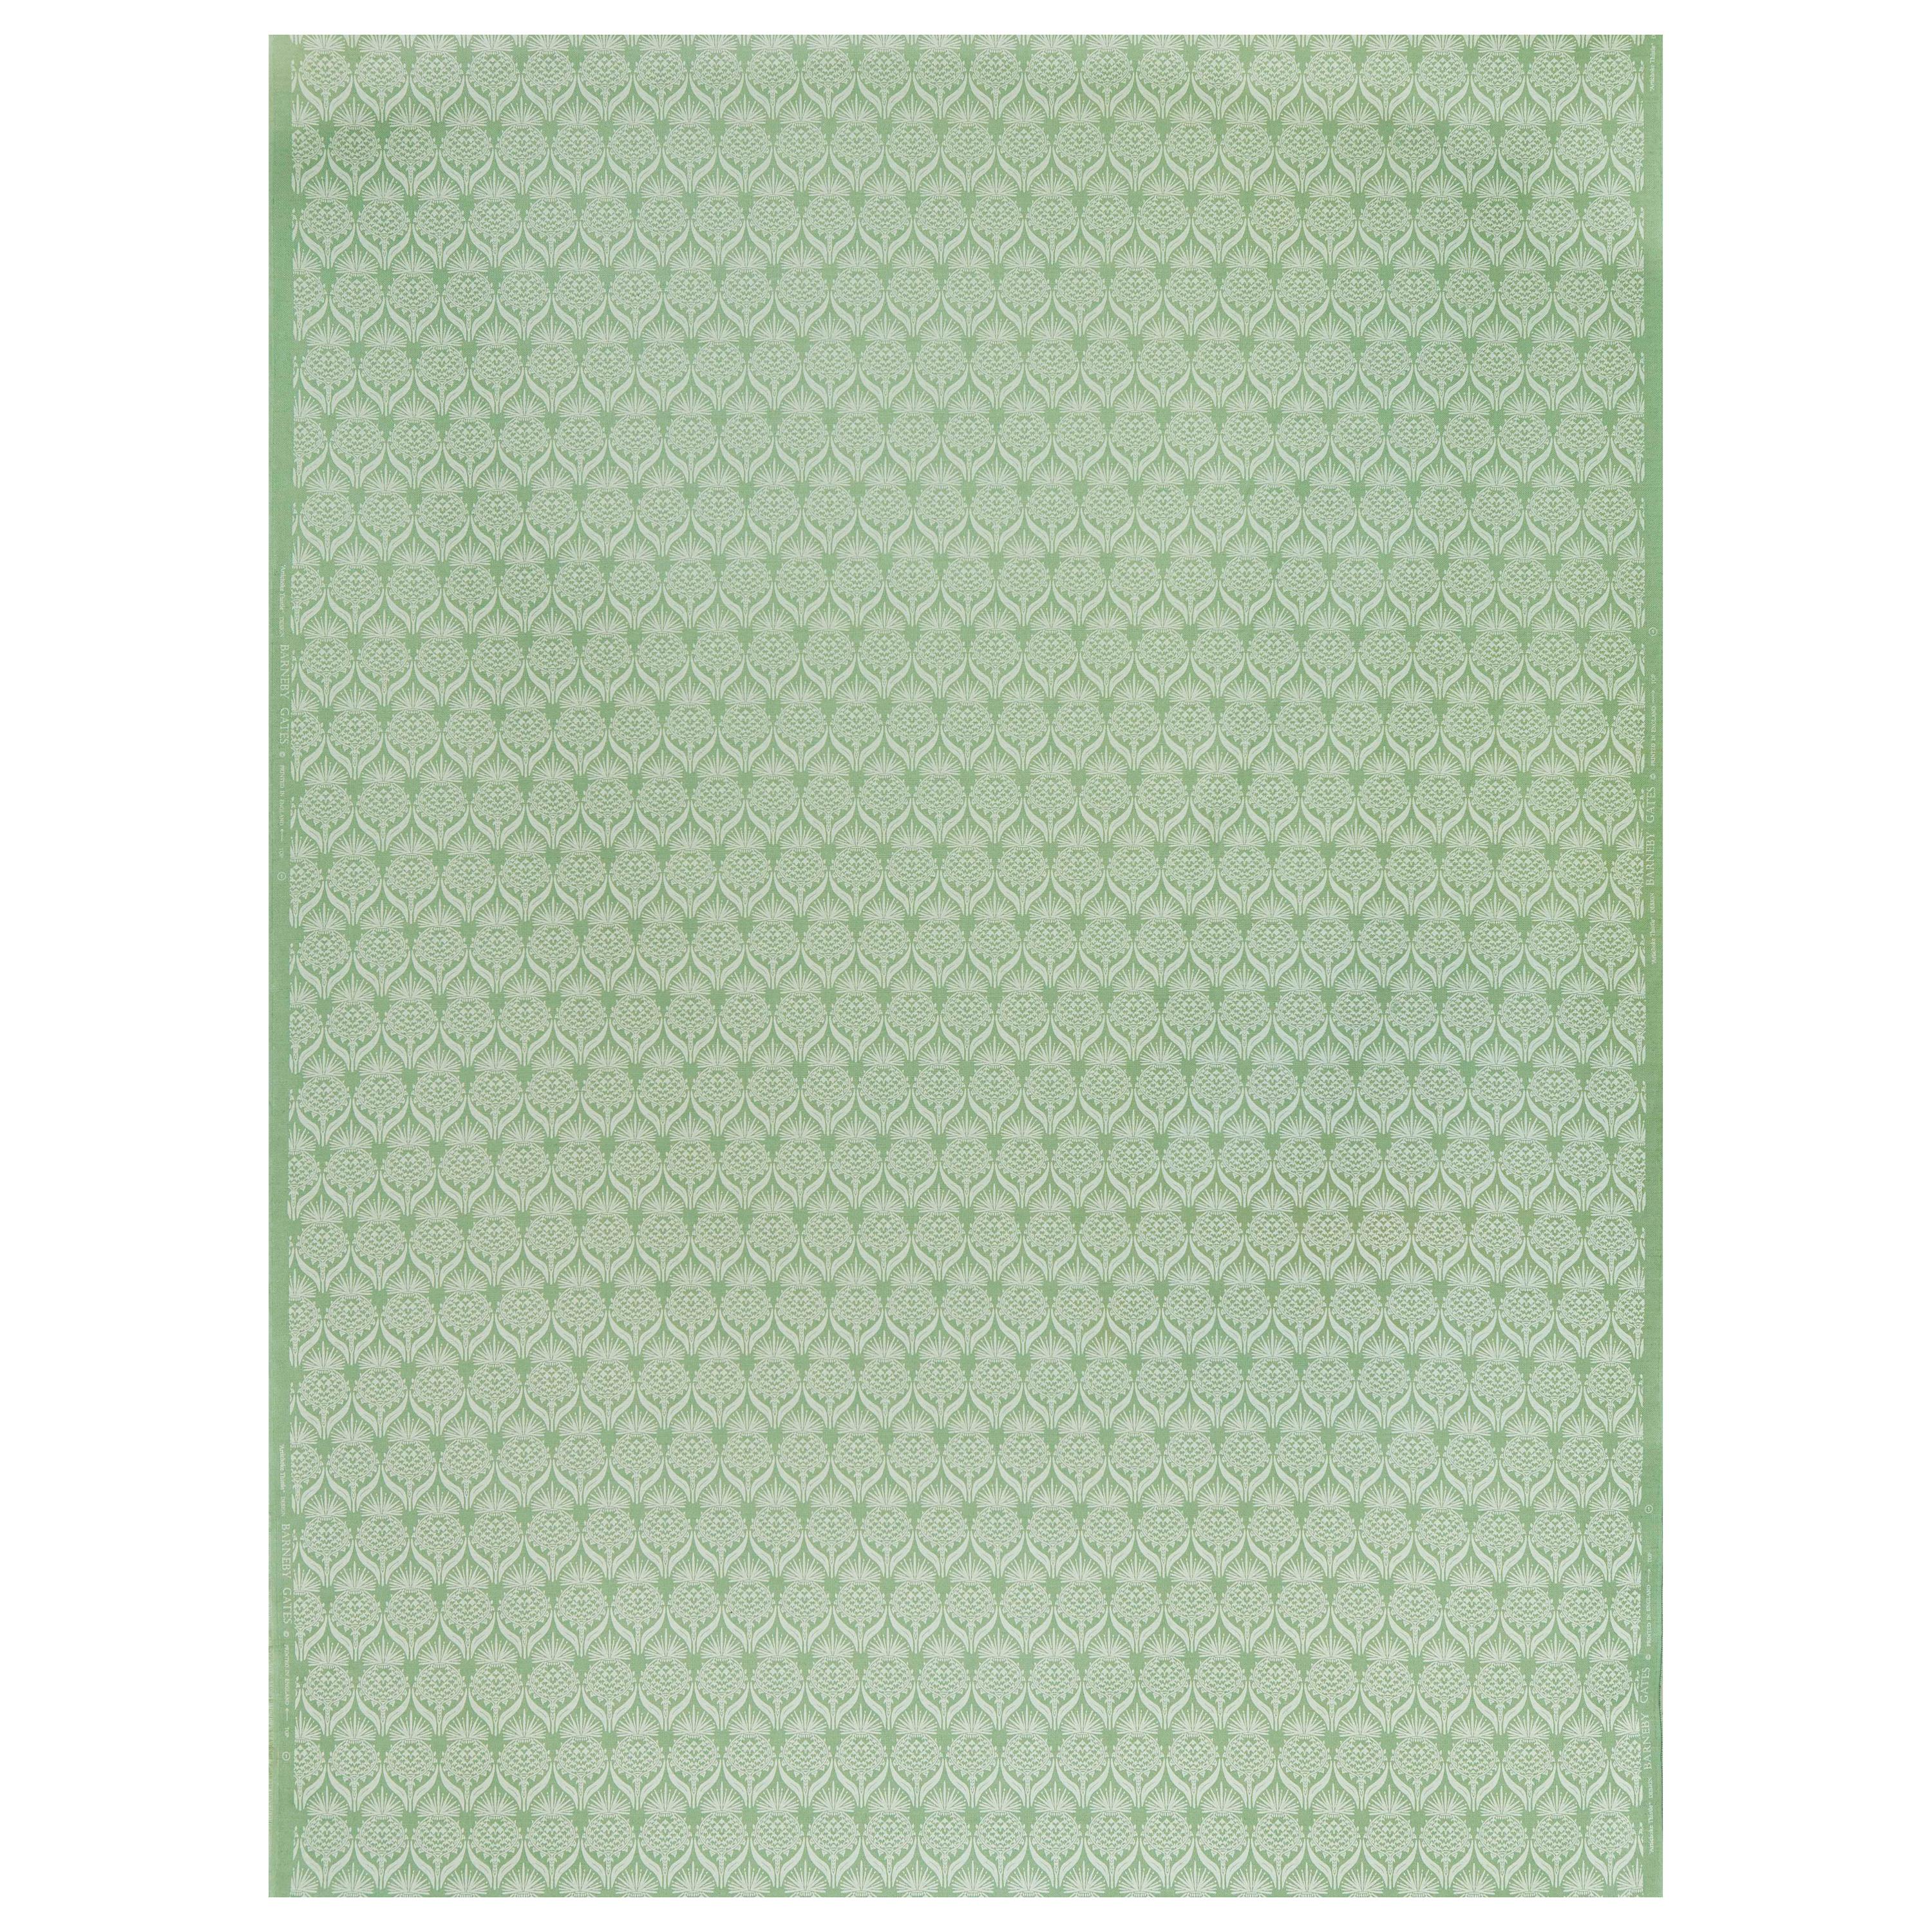 'Artichoke Thistle' Contemporary, Traditional Fabric in Spring Green For Sale